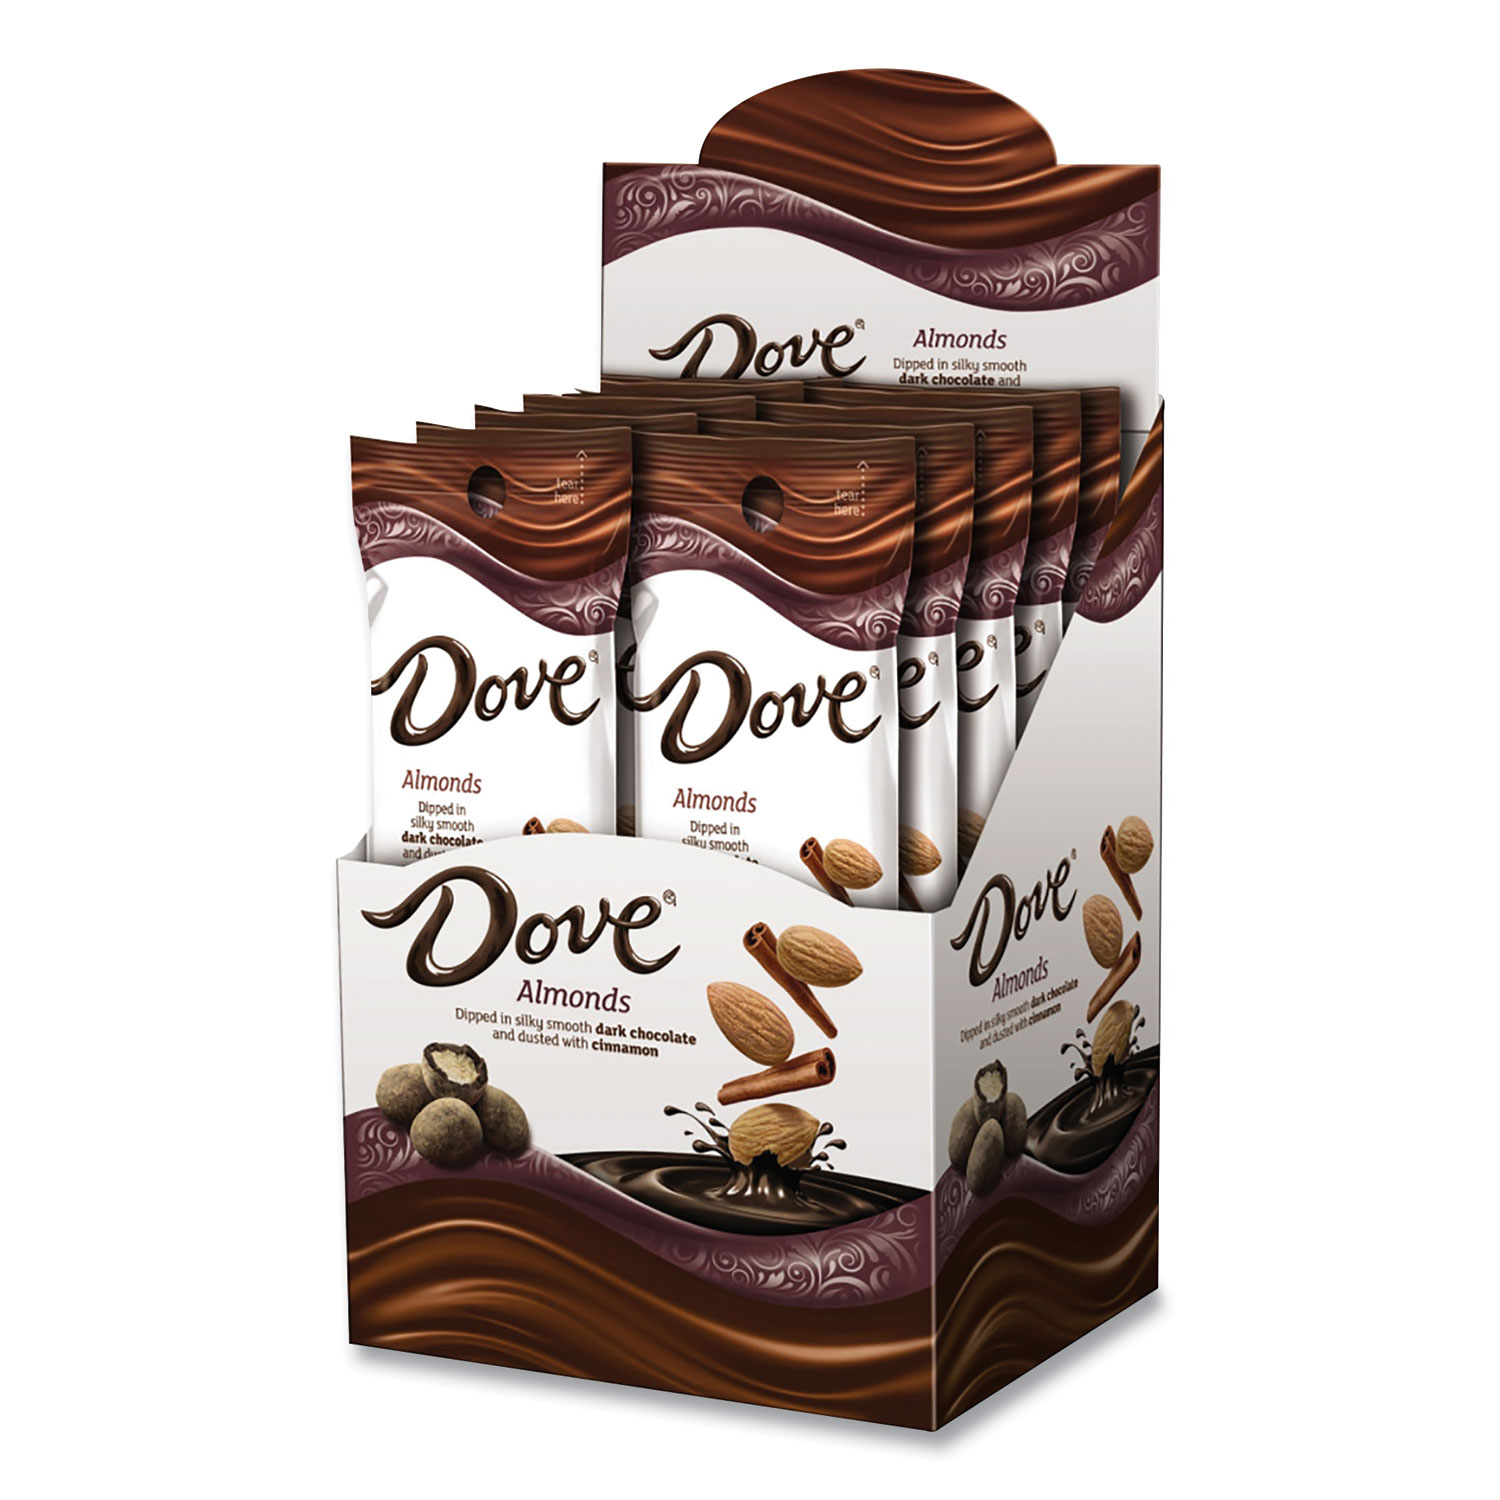  Dove Chocolate 365457 Dark Chocolate Almonds with Cinnamon, 1.6 oz Pouch, 10 Pouches/Carton, Free Delivery in 1-4 Business Days (GRR22500045) 